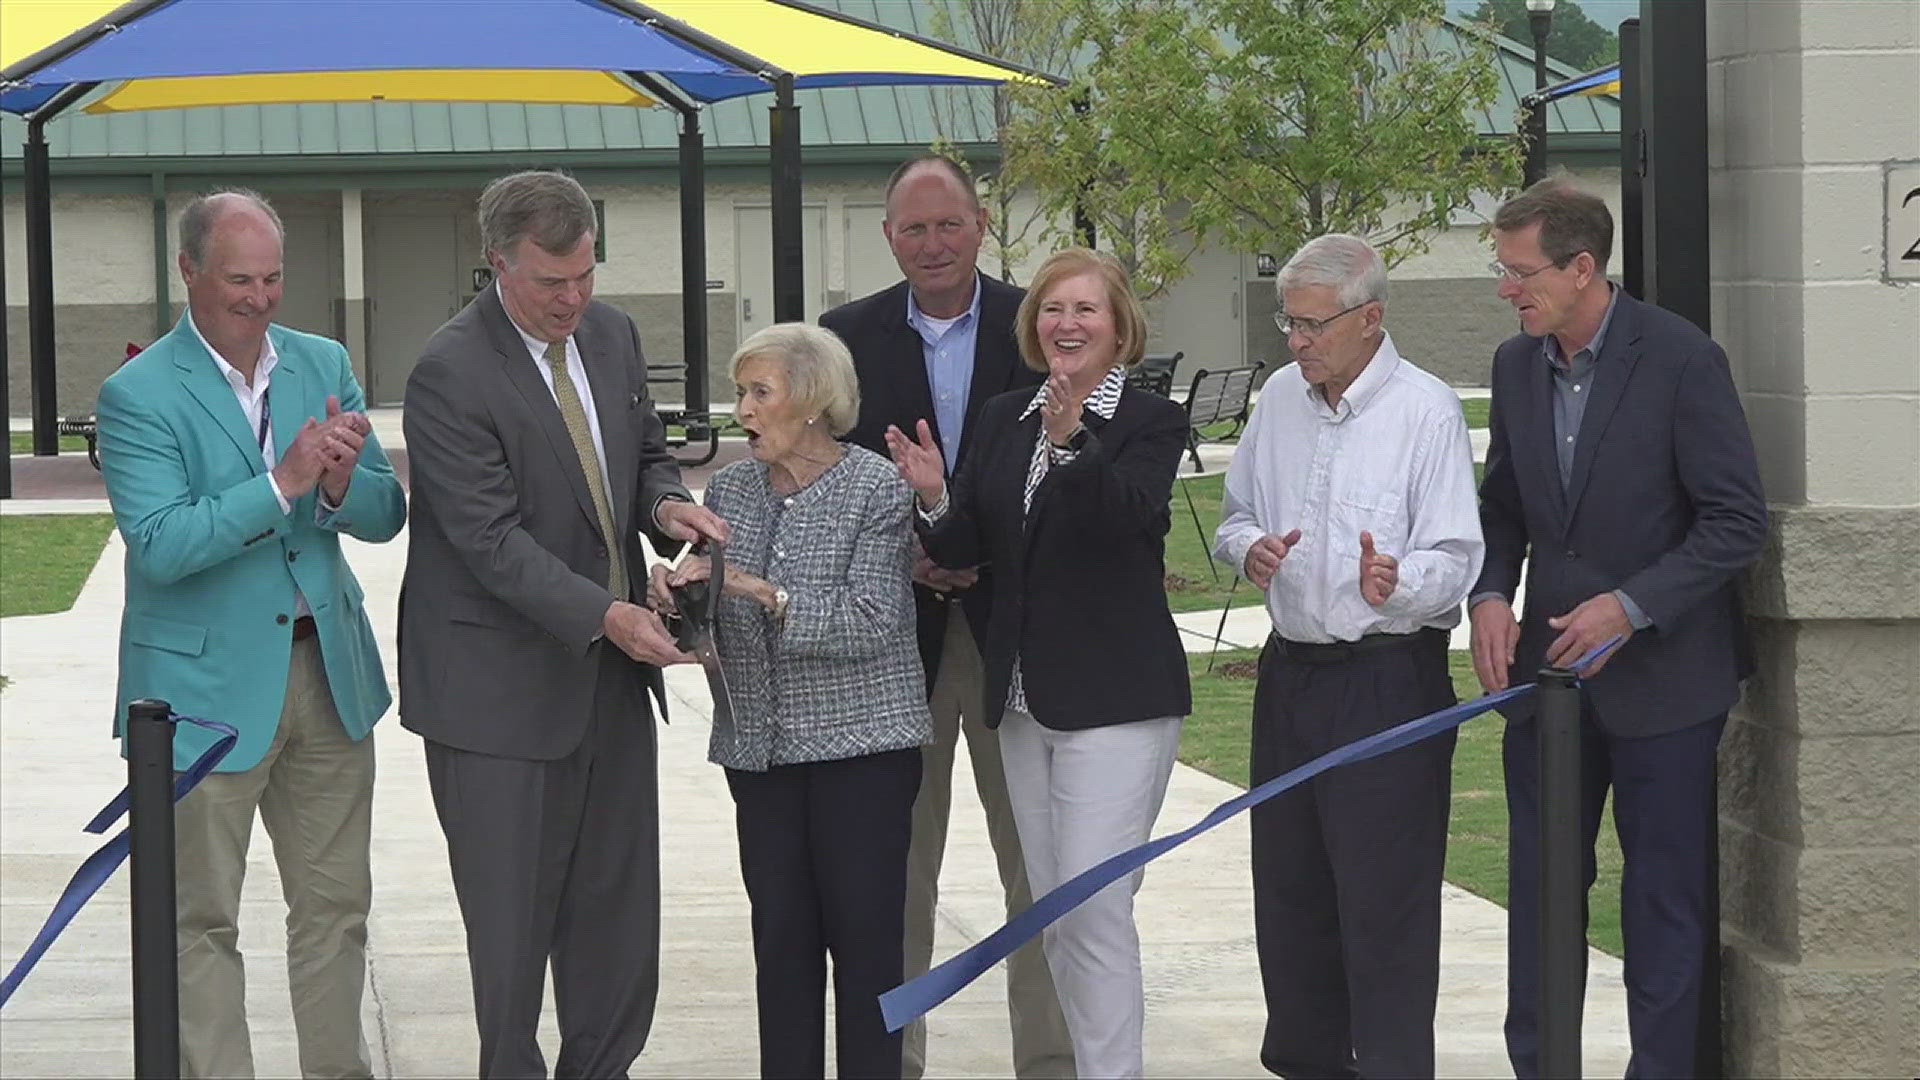 The facility is dedicated to former Huntsville Mayor Loretta P. Spencer